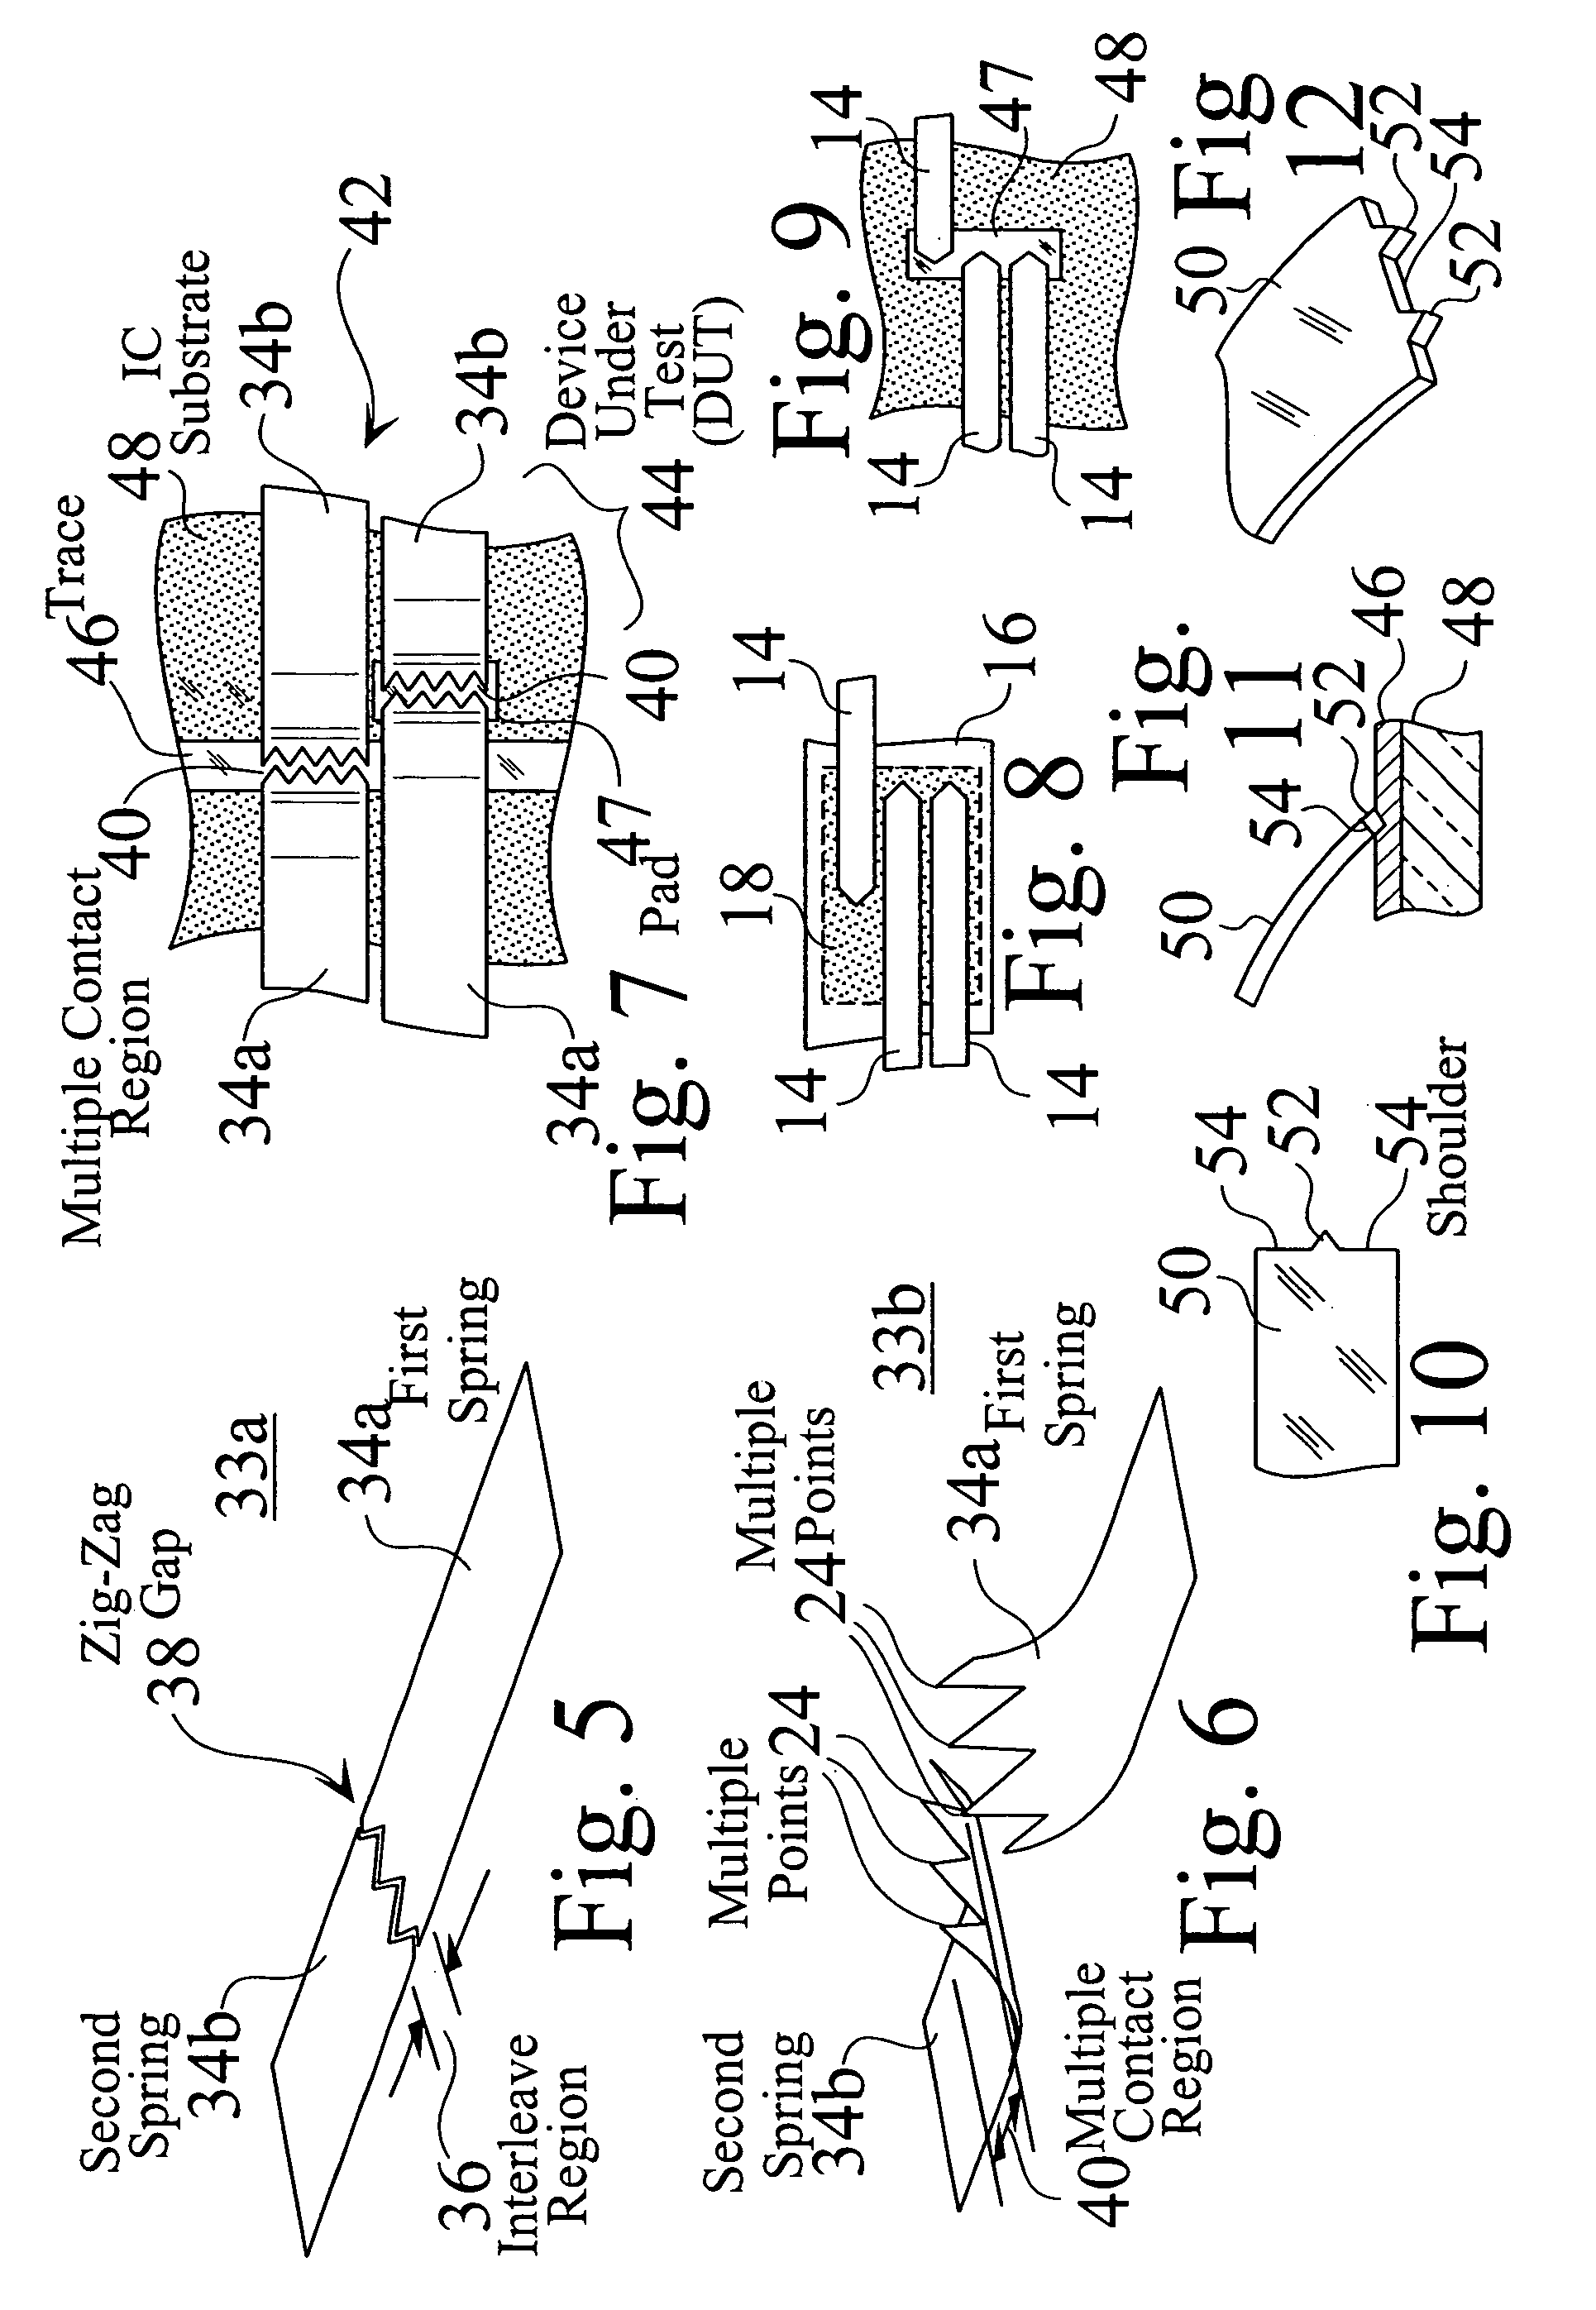 Enhanced compliant probe card systems having improved planarity